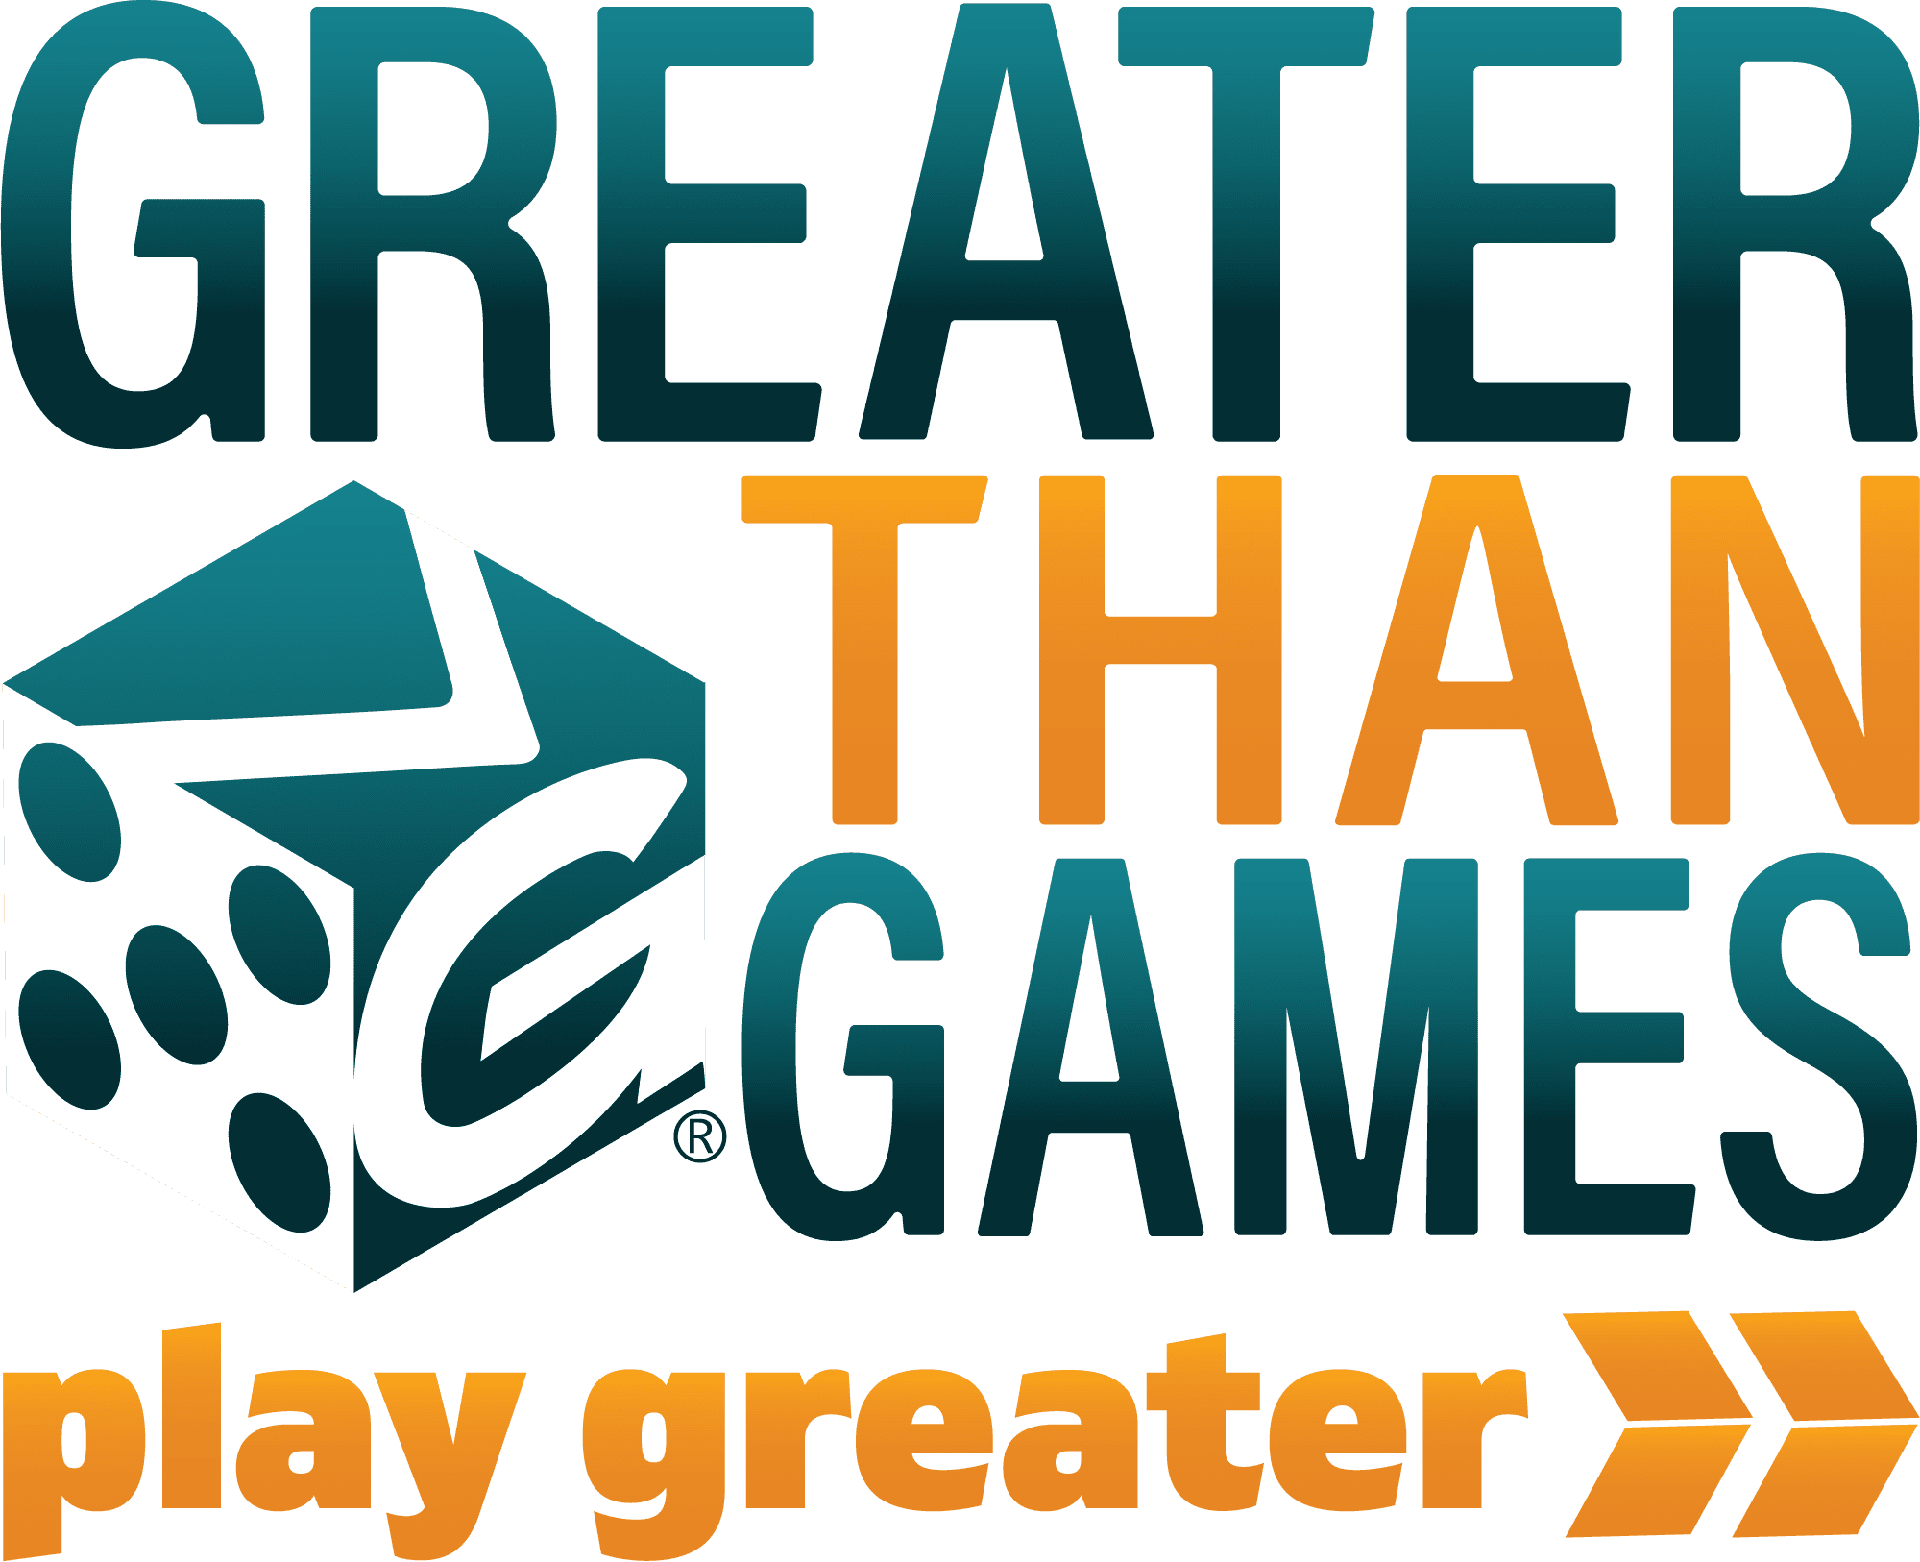 Brand: Greater Than Games